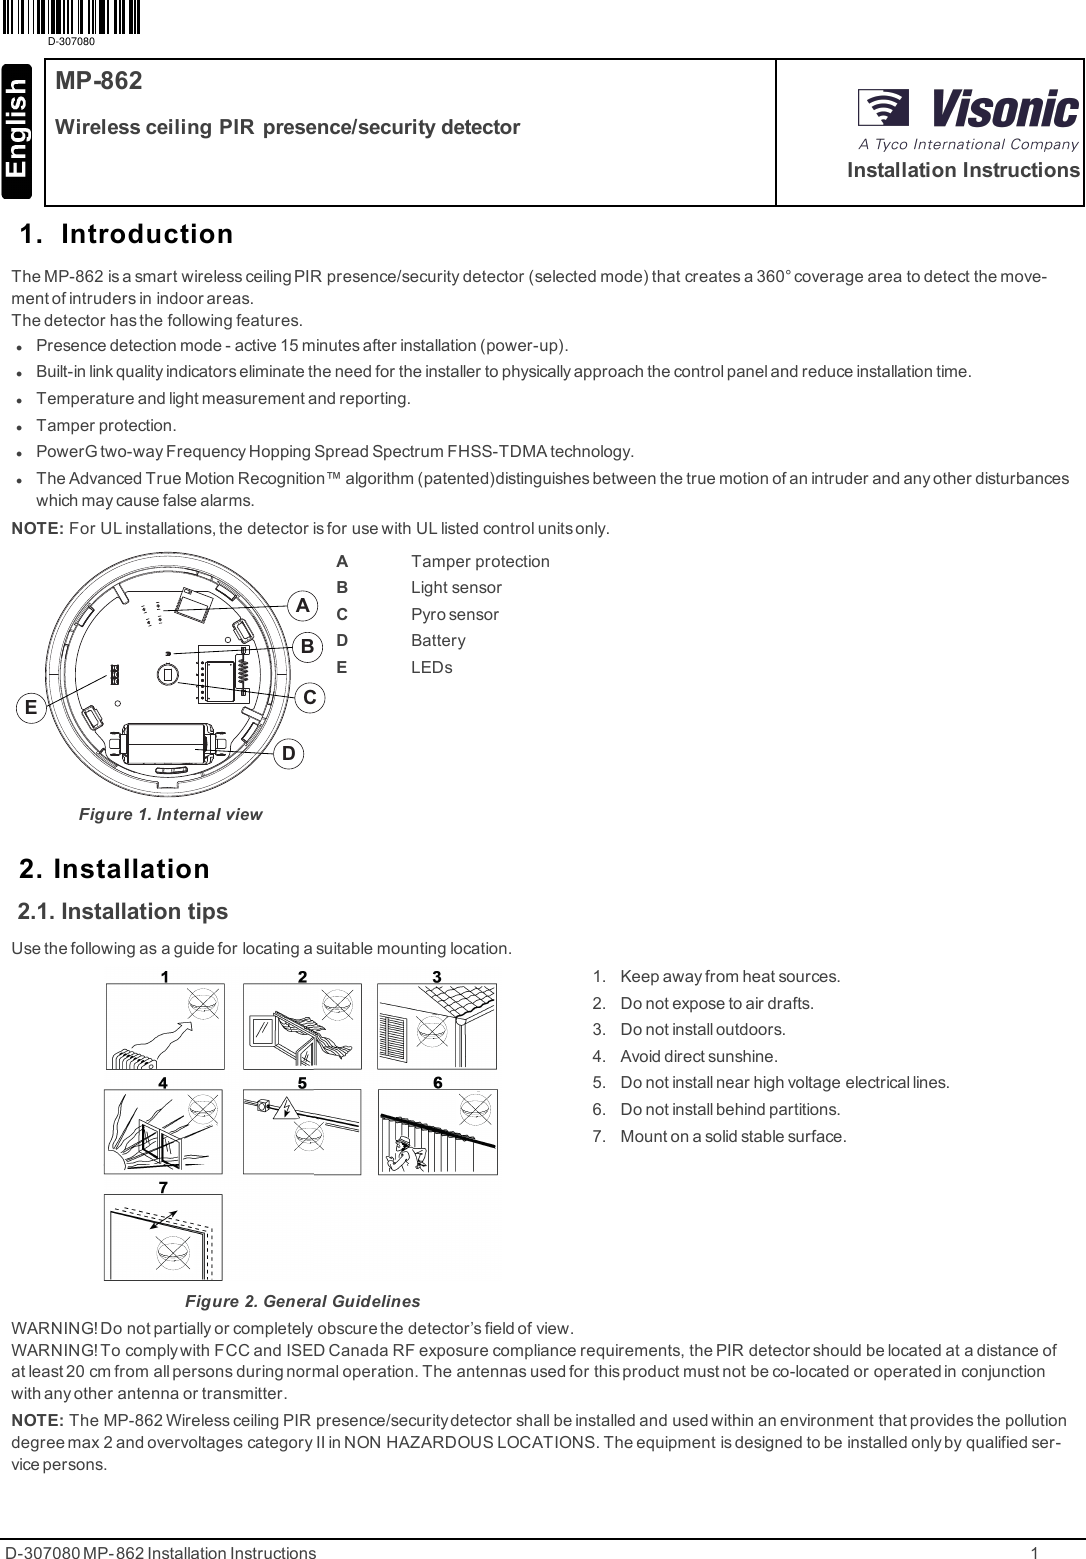 D-307080 MP- 862 Installation Instructions 11. IntroductionThe MP-862 is a smart wireless ceiling PIR presence/security detector (selected mode) that creates a 360° coverage area to detect the move-ment of intruders in indoor areas.The detector has the following features.lPresence detection mode - active 15 minutes after installation (power-up).lBuilt-in link quality indicators eliminate the need for the installer to physically approach the control panel and reduce installation time.lTemperature and light measurement and reporting.lTamper protection.lPowerG two-way Frequency Hopping Spread Spectrum FHSS-TDMA technology.lThe Advanced True Motion Recognition™ algorithm (patented)distinguishes between the true motion of an intruder and any other disturbanceswhich may cause false alarms.NOTE: For UL installations, the detector is for use with UL listed control units only.DABCEFigure 1. Internal viewATamper protectionBLight sensorCPyro sensorDBatteryELEDs2. Installation2.1. Installation tipsUse the following as a guide for locating a suitable mounting location.1. Keep away from heat sources.2. Do not expose to air drafts.3. Do not install outdoors.4. Avoid direct sunshine.5. Do not install near high voltage electrical lines.6. Do not install behind partitions.7. Mount on a solid stable surface.Figure 2. General GuidelinesWARNING! Do not partially or completely obscure the detector’s field of view.WARNING! To complywith FCC and ISED Canada RF exposure compliance requirements, the PIR detector should be located at a distance ofat least 20 cm from all persons during normal operation. The antennas used for this product must not be co-located or operated in conjunctionwith any other antenna or transmitter.NOTE: The MP-862 Wireless ceiling PIR presence/securitydetector shall be installed and used within an environment that provides the pollutiondegree max 2 and overvoltages category II in NON HAZARDOUS LOCATIONS. The equipment is designed to be installed only by qualified ser-vice persons.D-307080MP-862Wireless ceiling PIR presence/security detectorInstallation Instructions